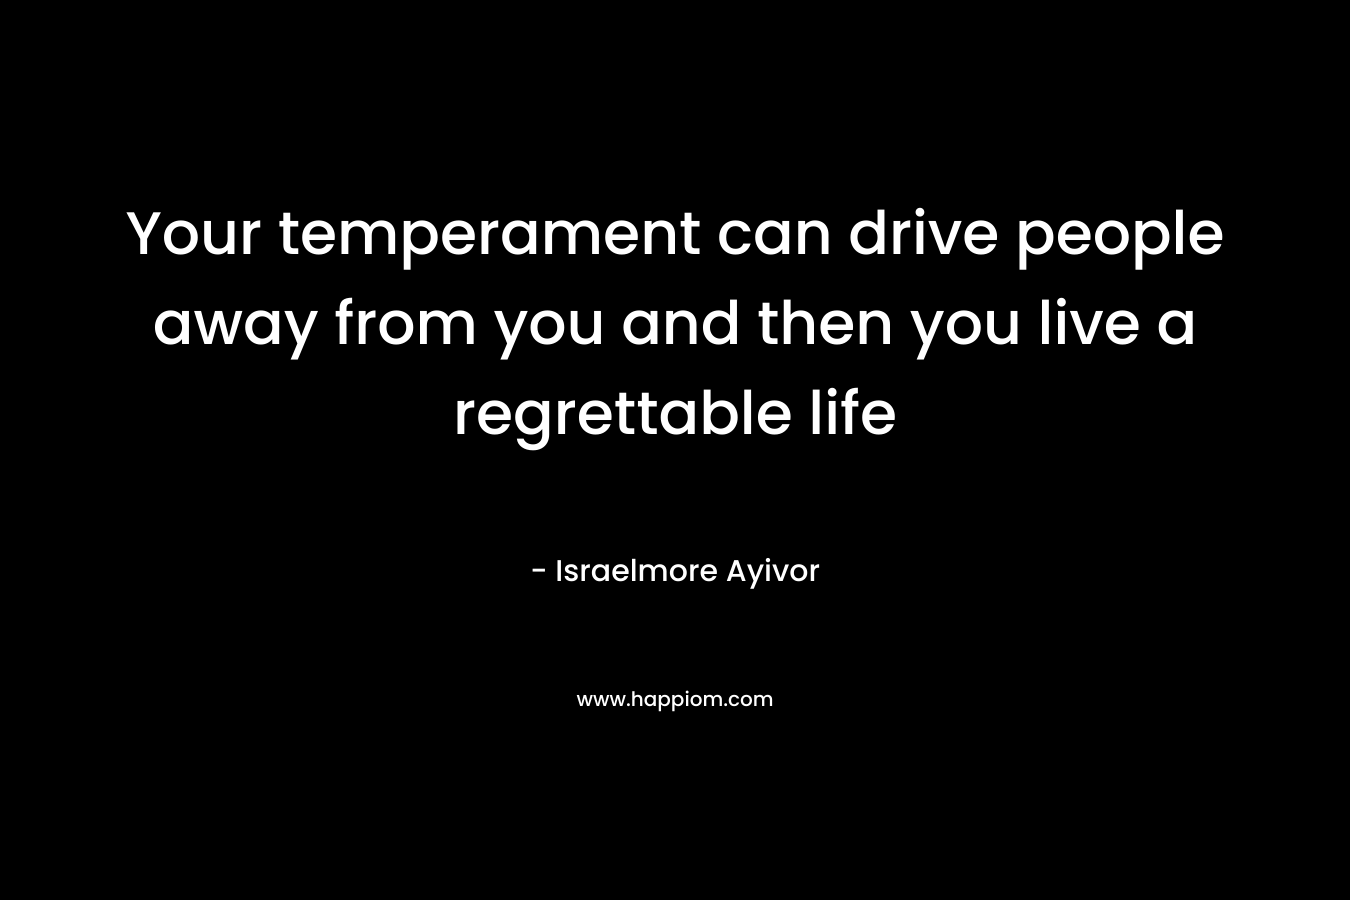 Your temperament can drive people away from you and then you live a regrettable life – Israelmore Ayivor